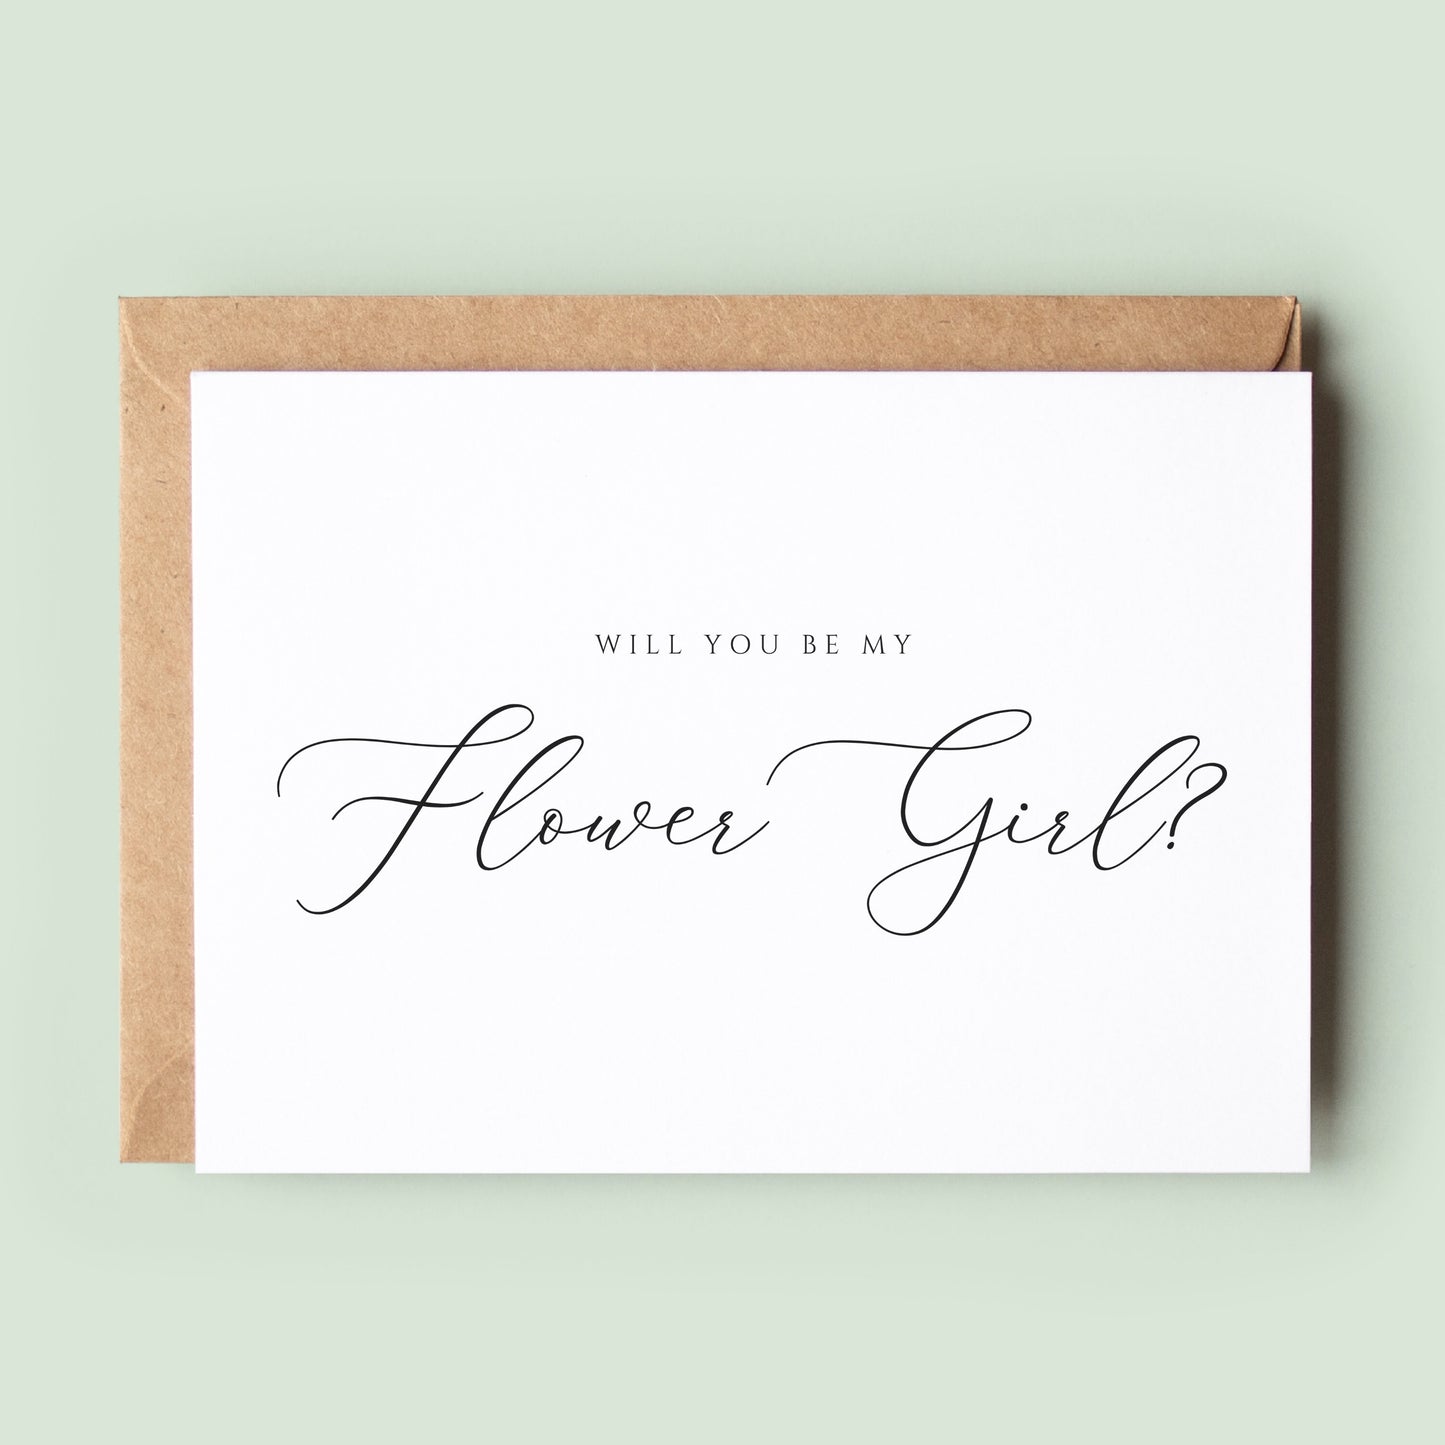 Classic Will You Be My Best Man Card, Will You Be My Best Man Wedding Card, Card To Best Man, Best Man Proposal Card, Greeting Card